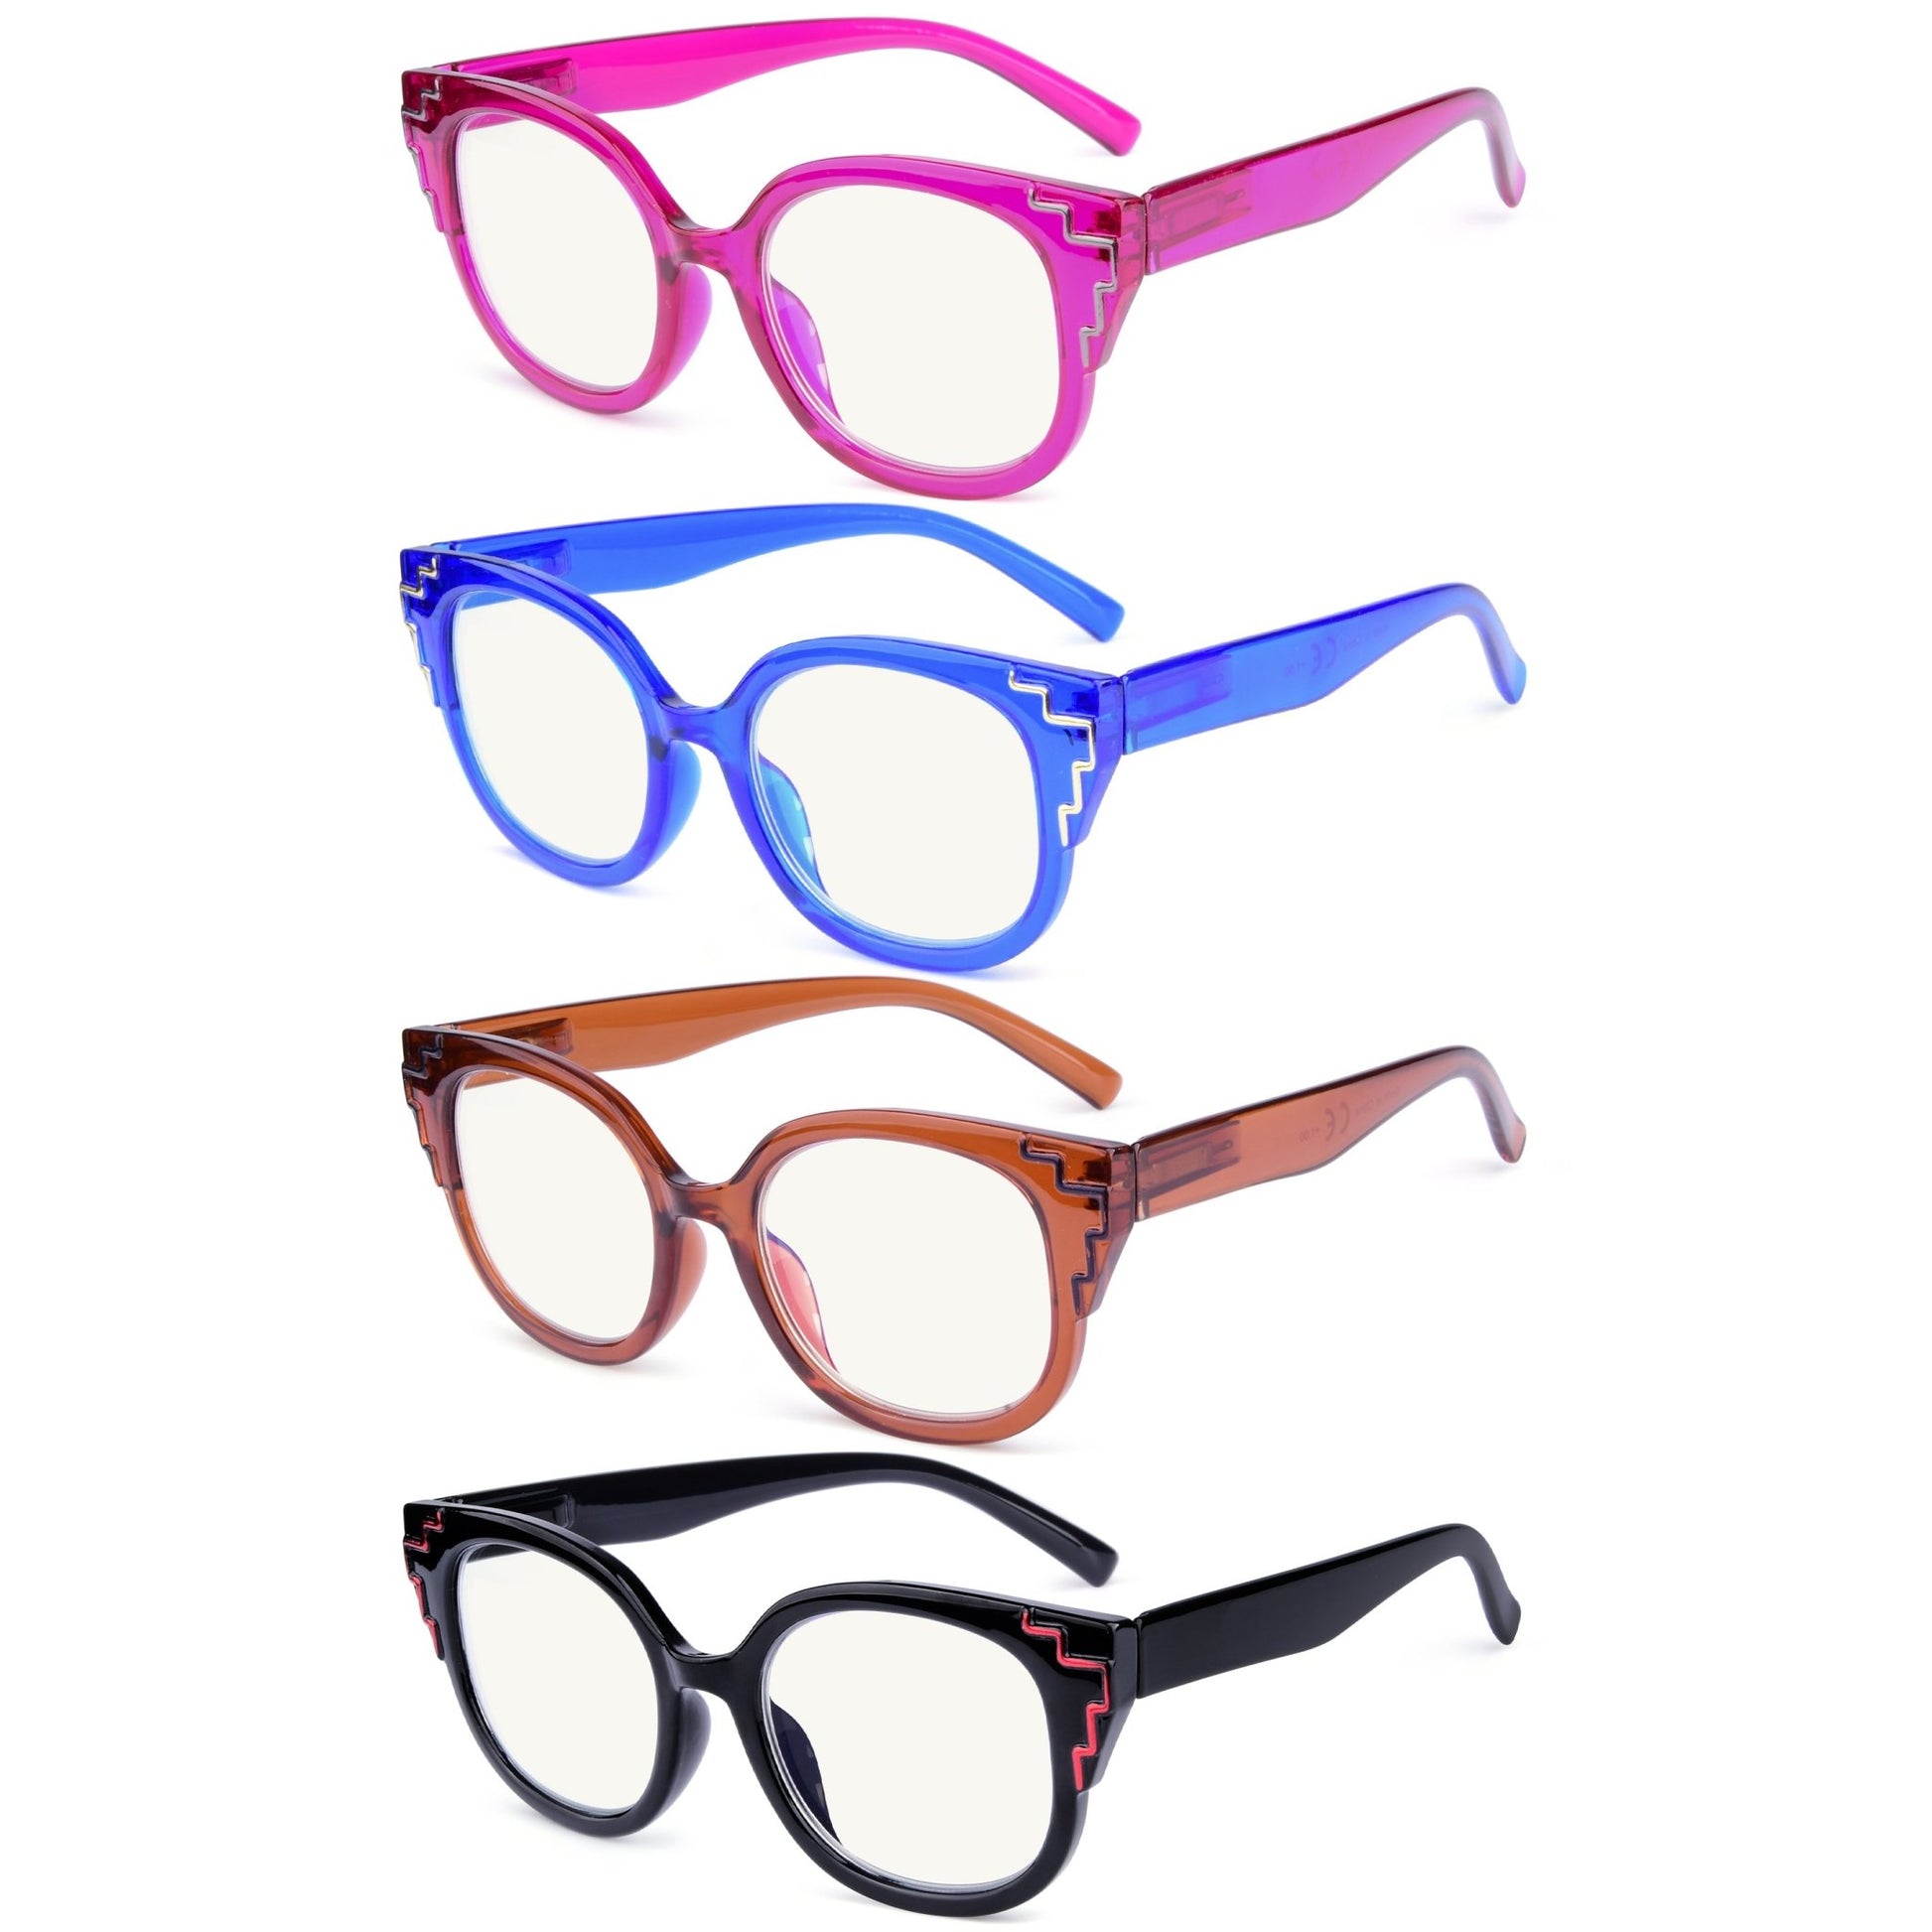 4 Pack Square Multifocal Readers for Women M2119